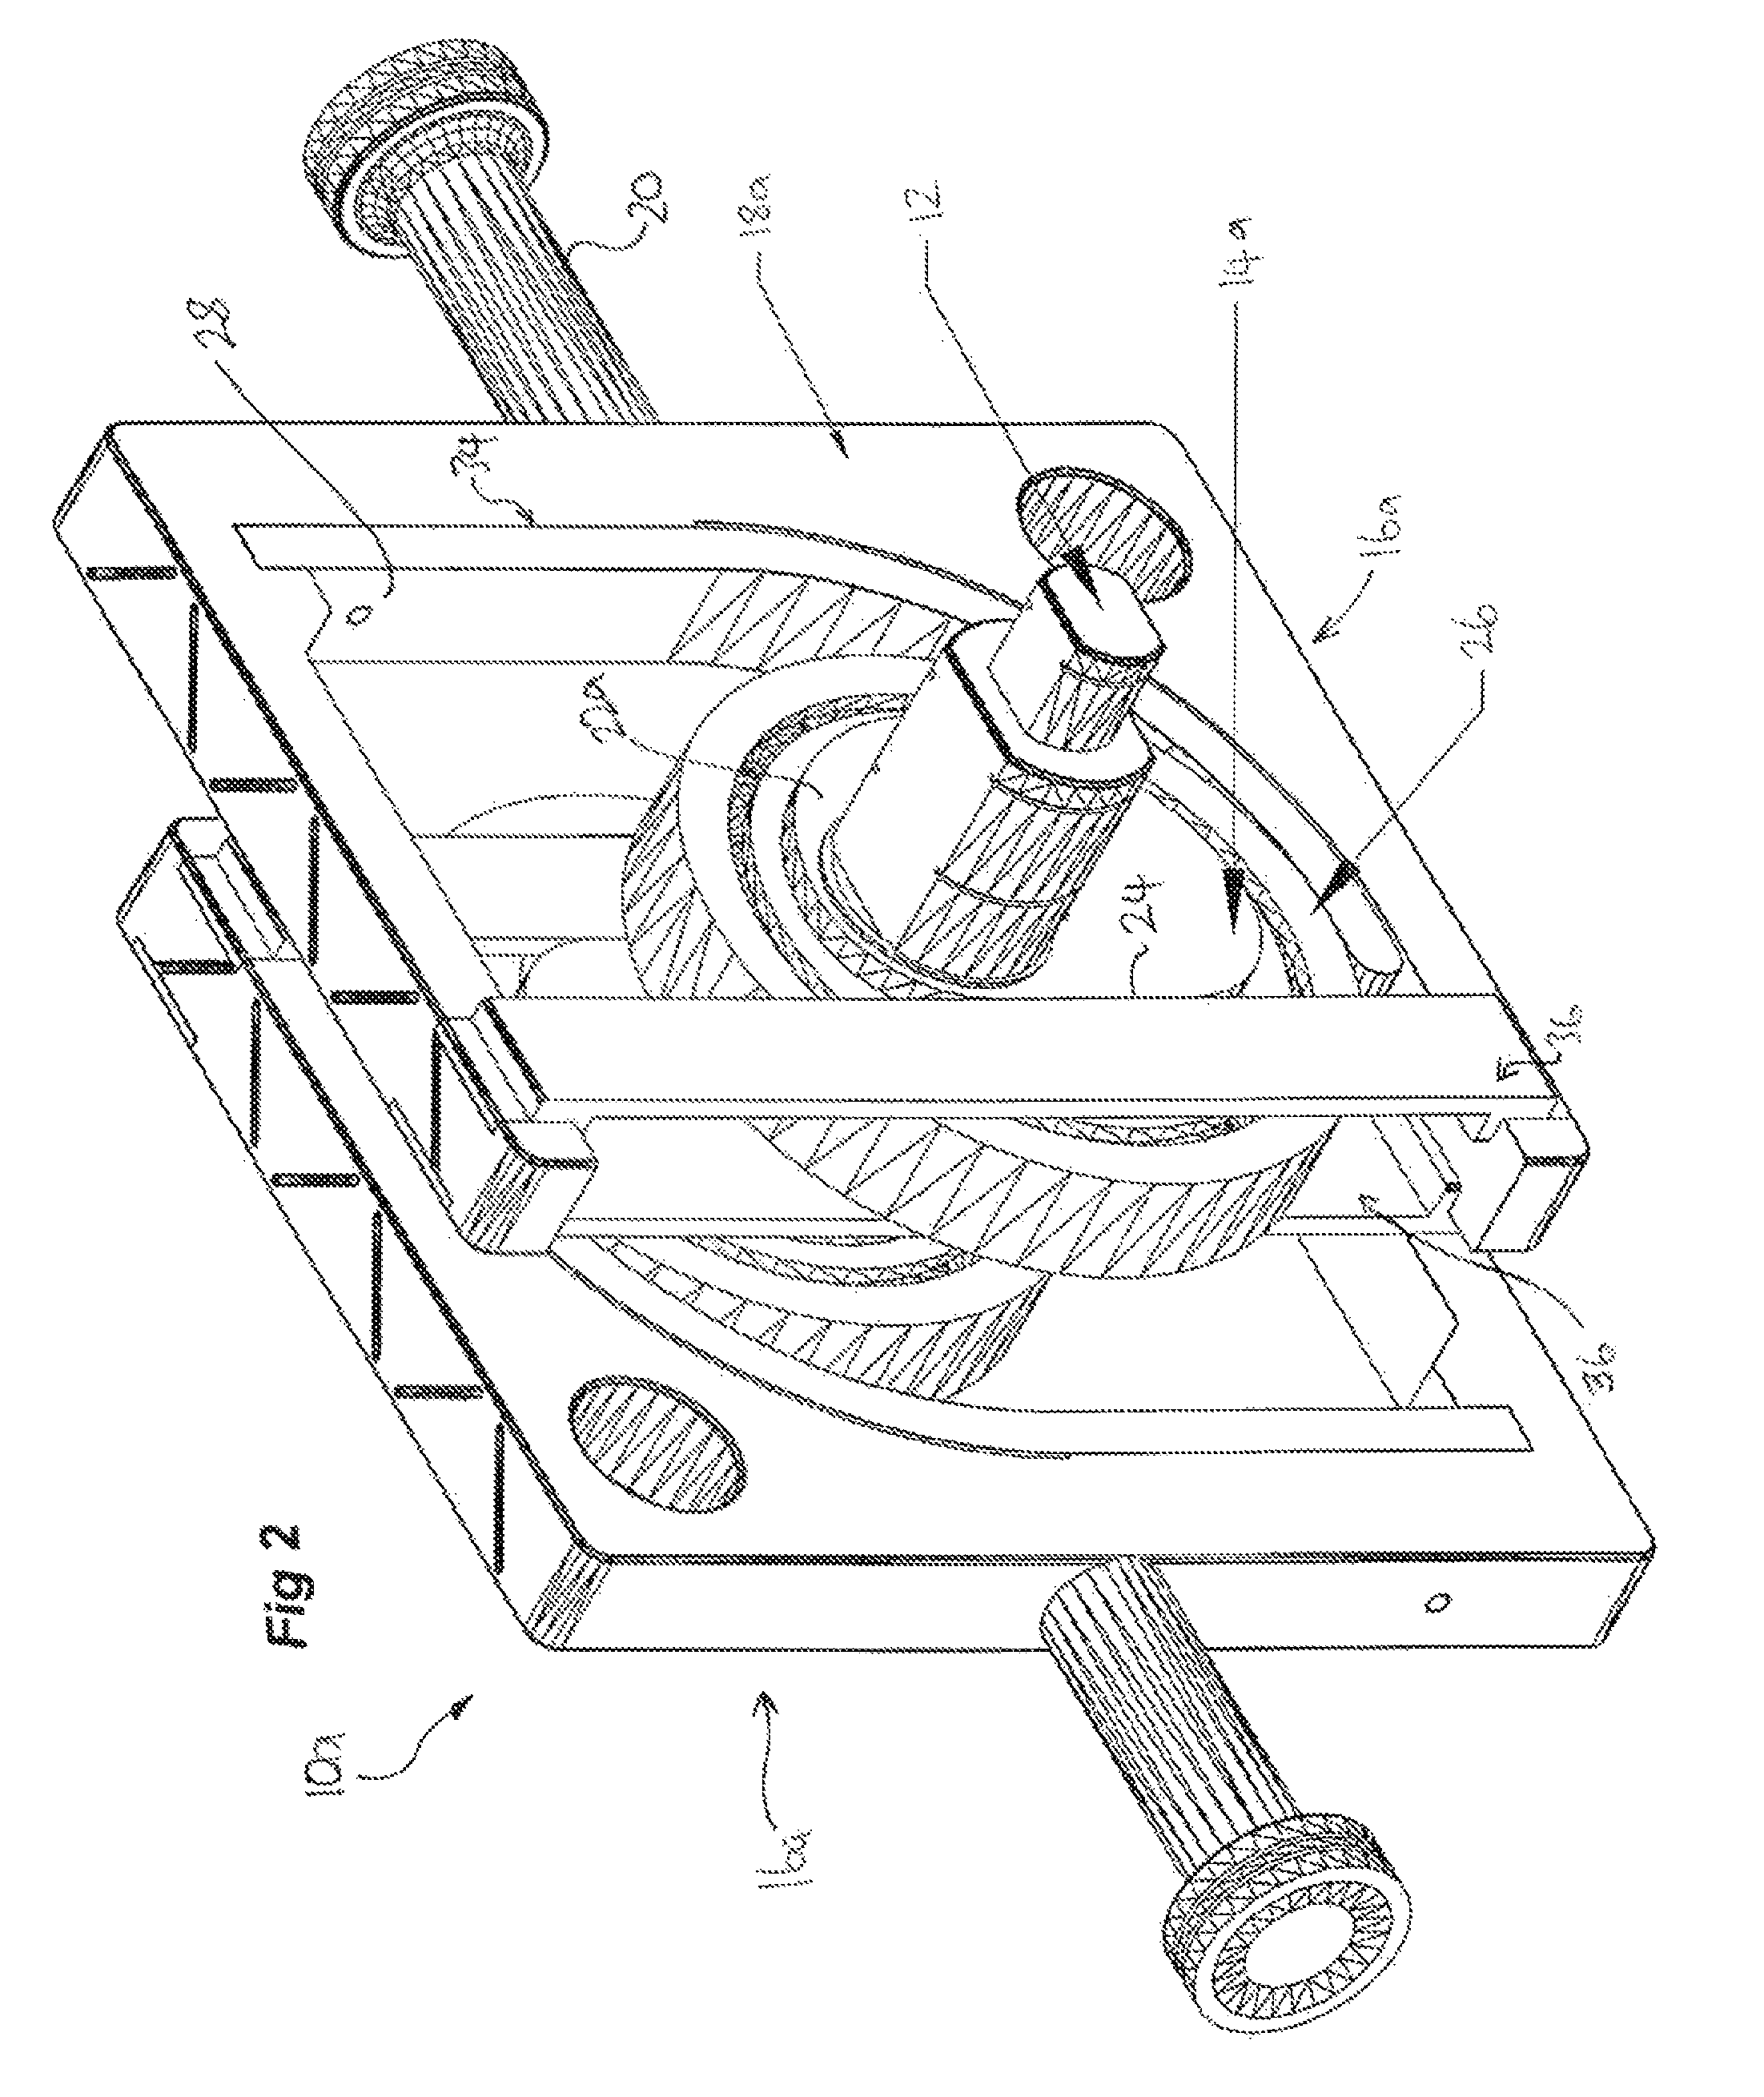 Desmodronic shaft and yoke assembly for translating linear to rotary motion